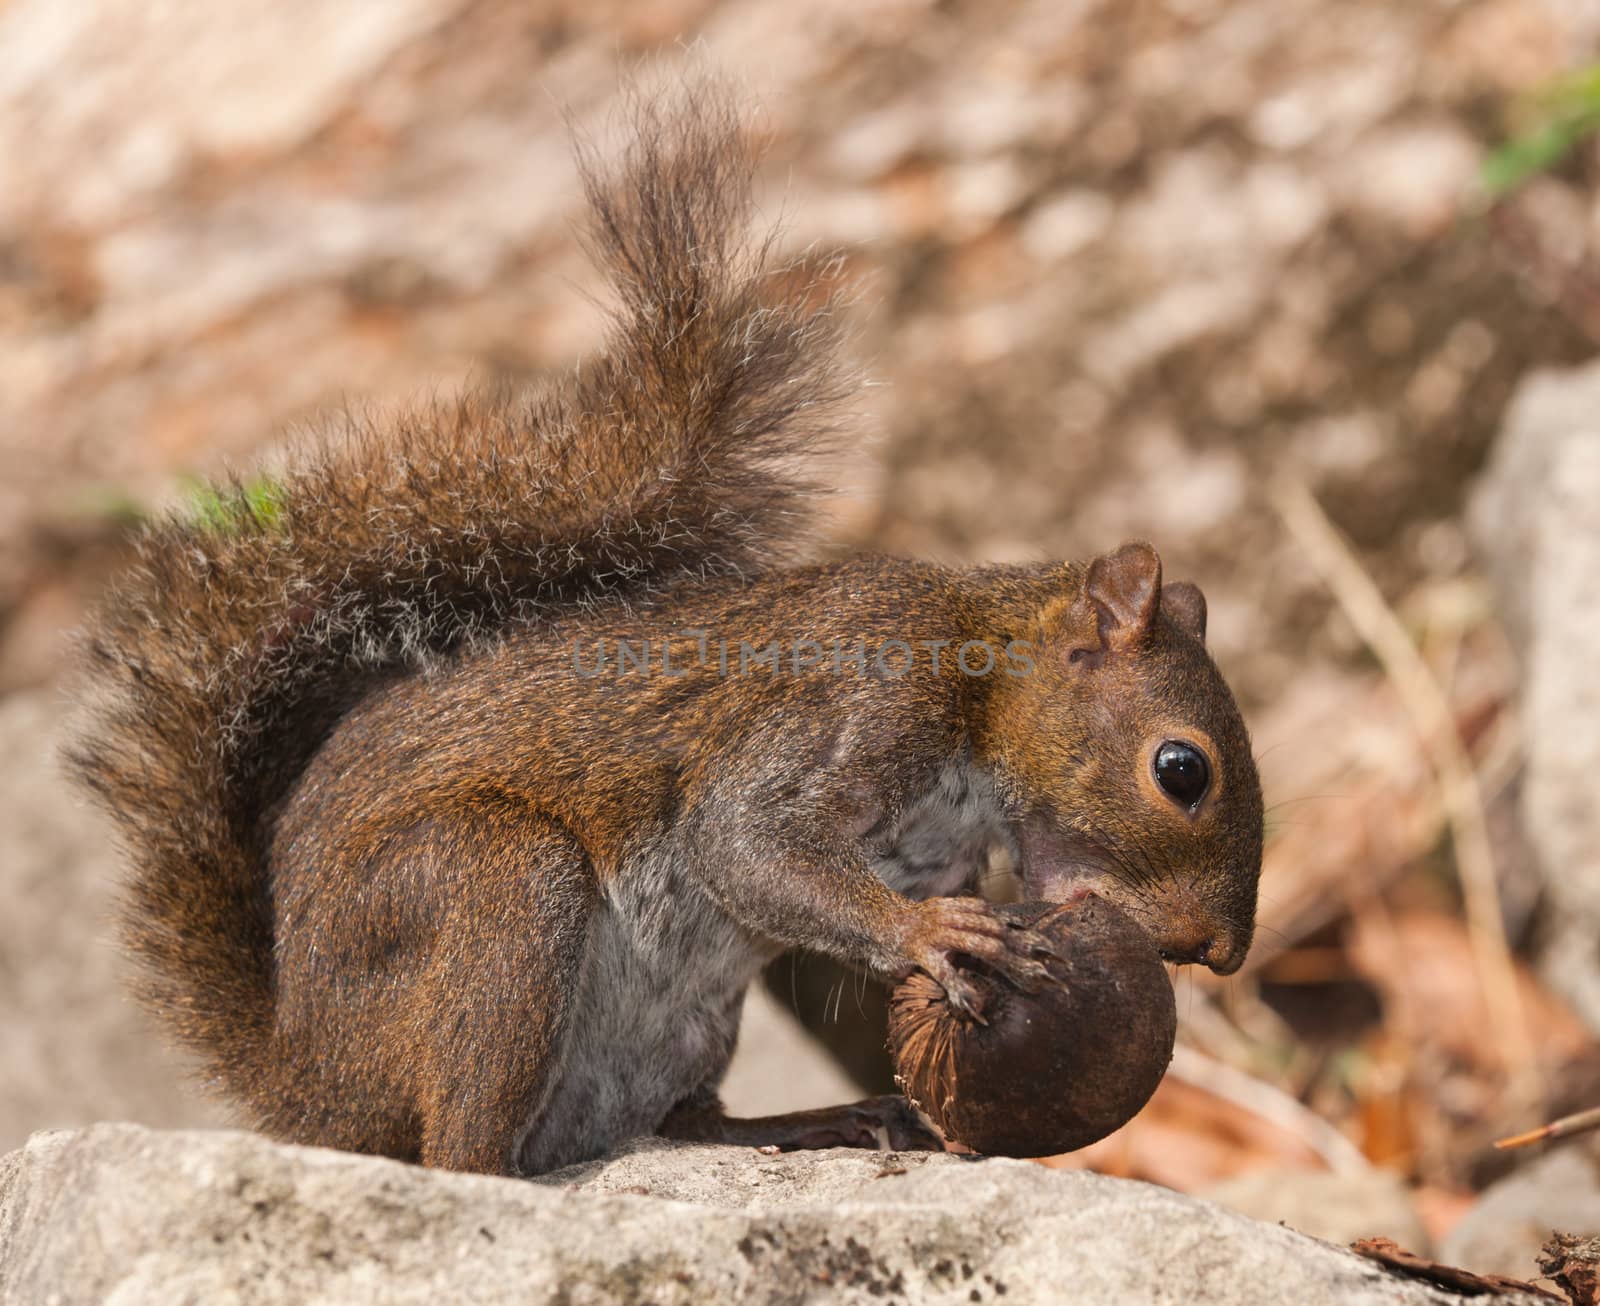 Squirrel eating nut in Belize, Central America.